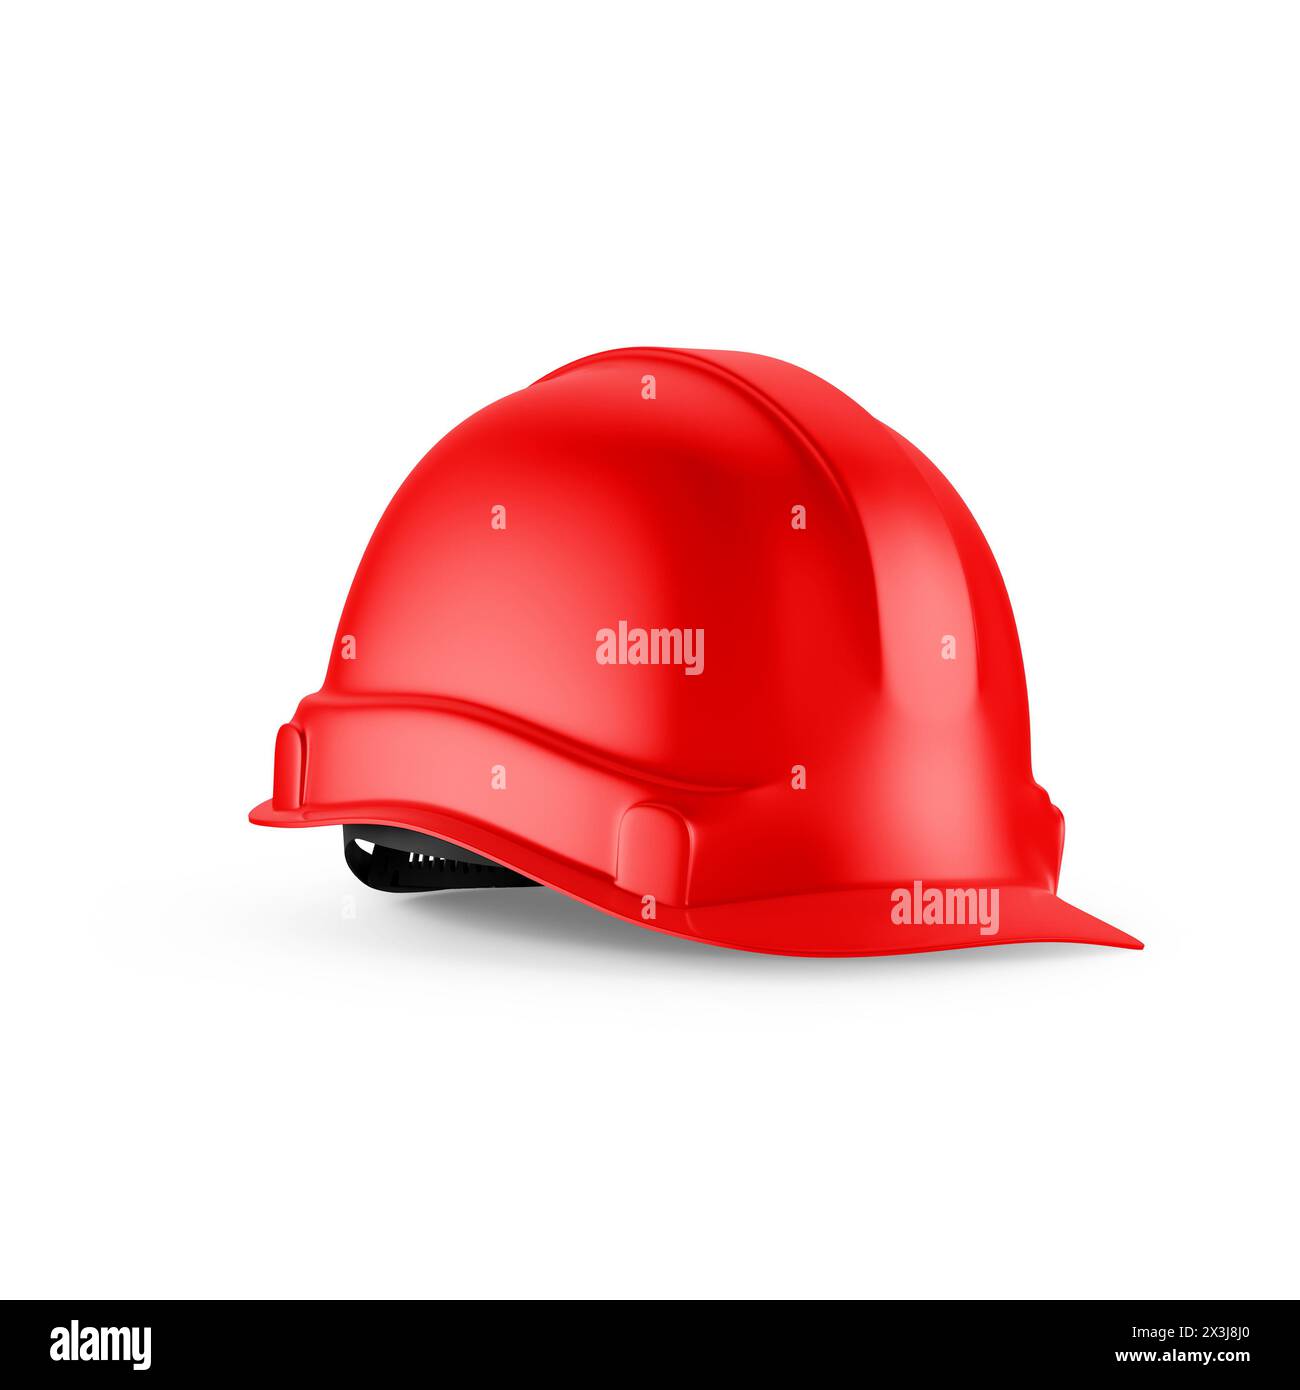 Red Hard Hat Mockup Isolated on White Background 3D Rendering Stock Photo